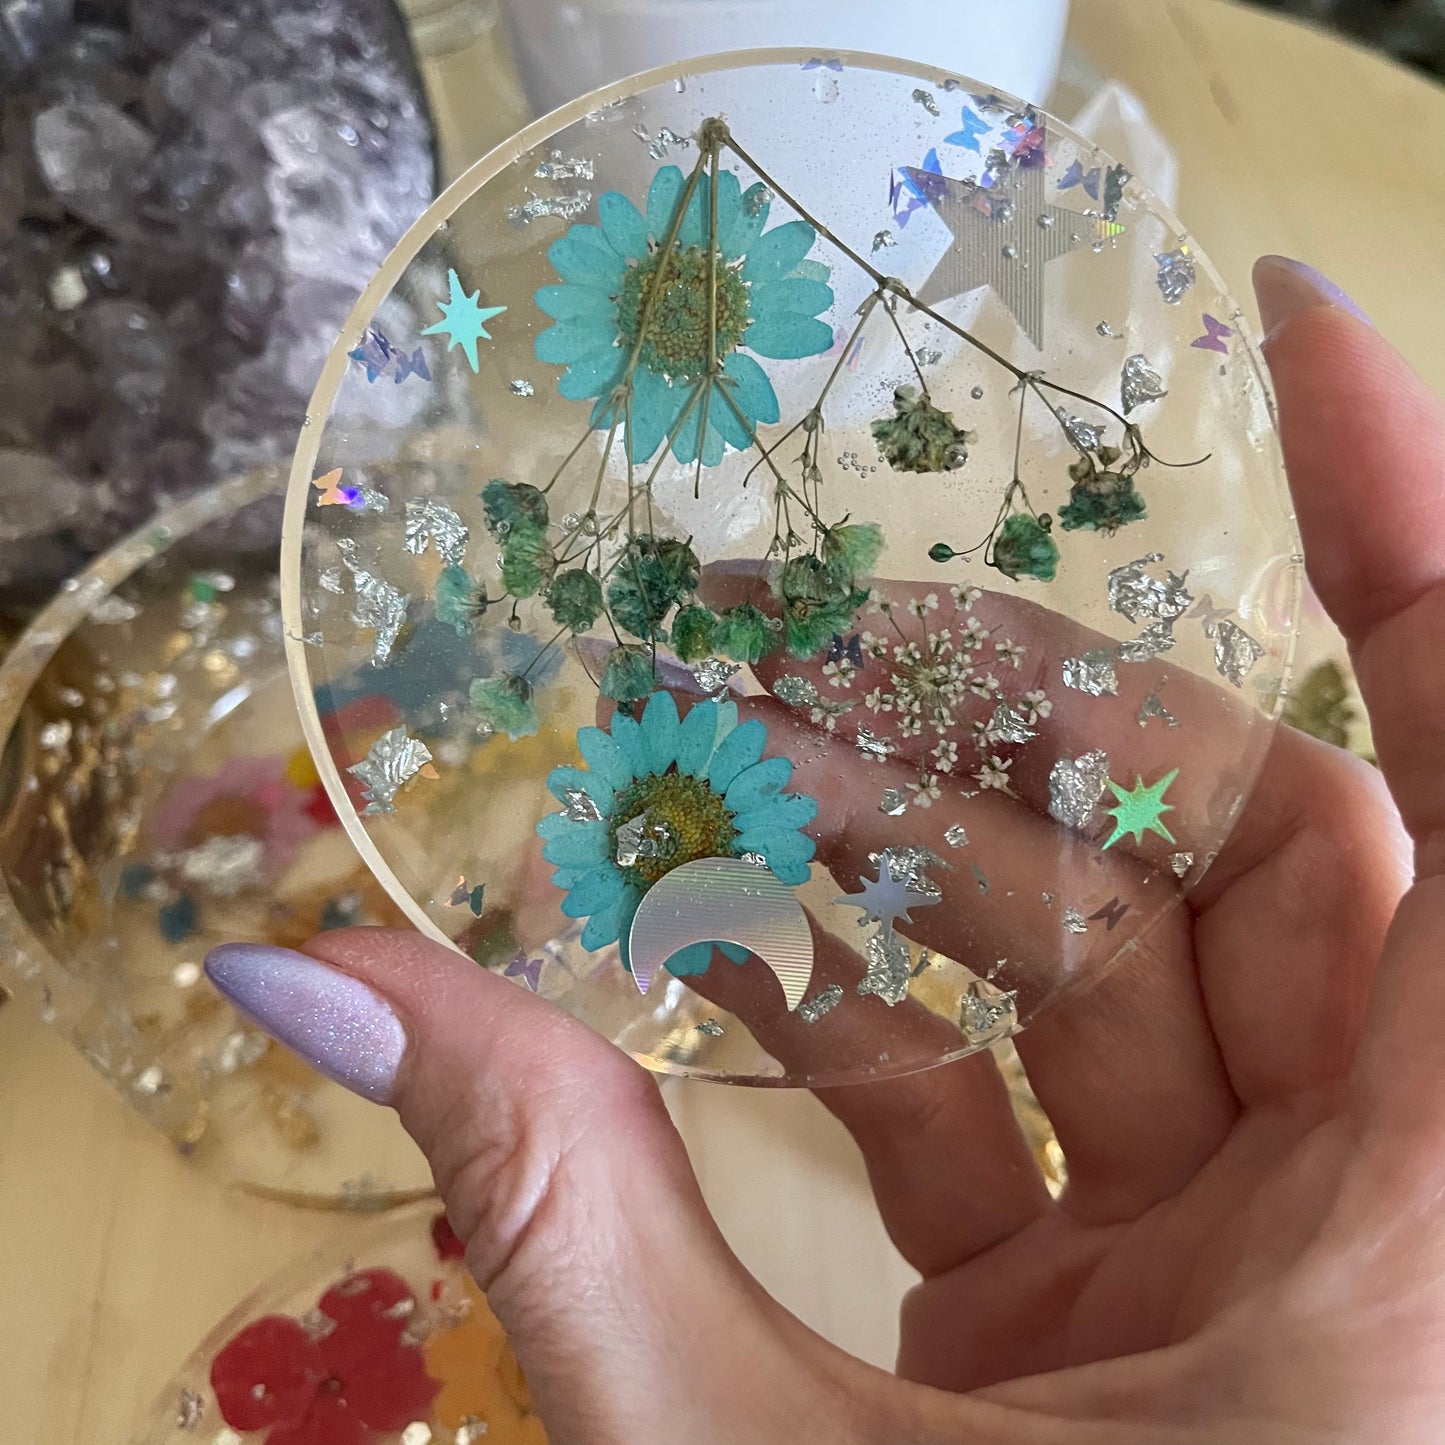 Flower Resin Coaster Class - pressed flowers- Tuesday 4/16 @ 6pm